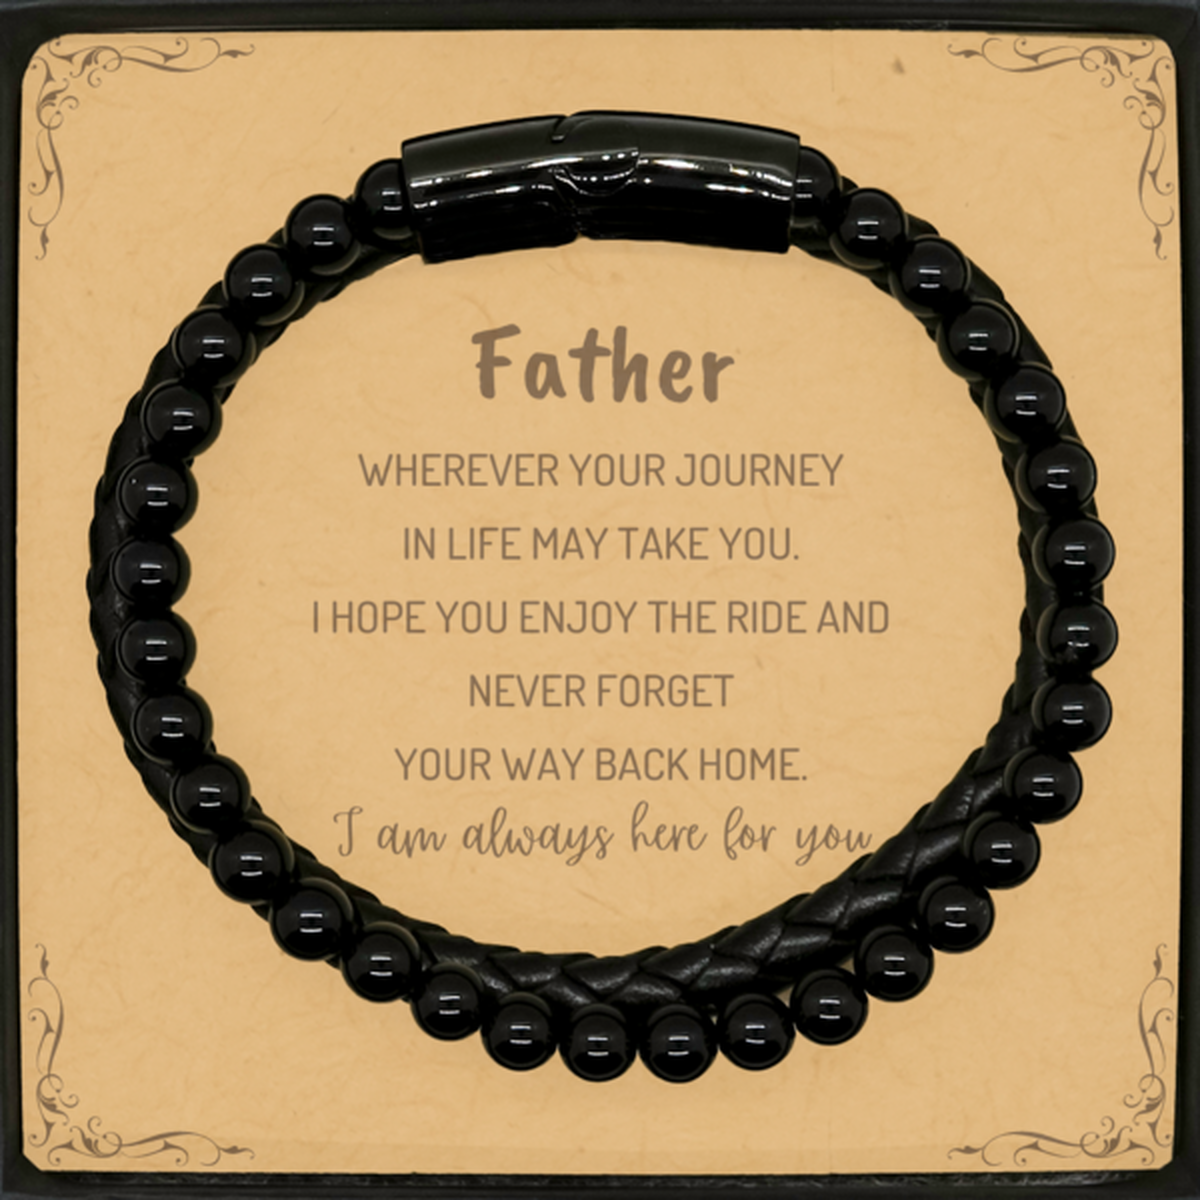 Father wherever your journey in life may take you, I am always here for you Father Stone Leather Bracelets, Awesome Christmas Gifts For Father Message Card, Father Birthday Gifts for Men Women Family Loved One